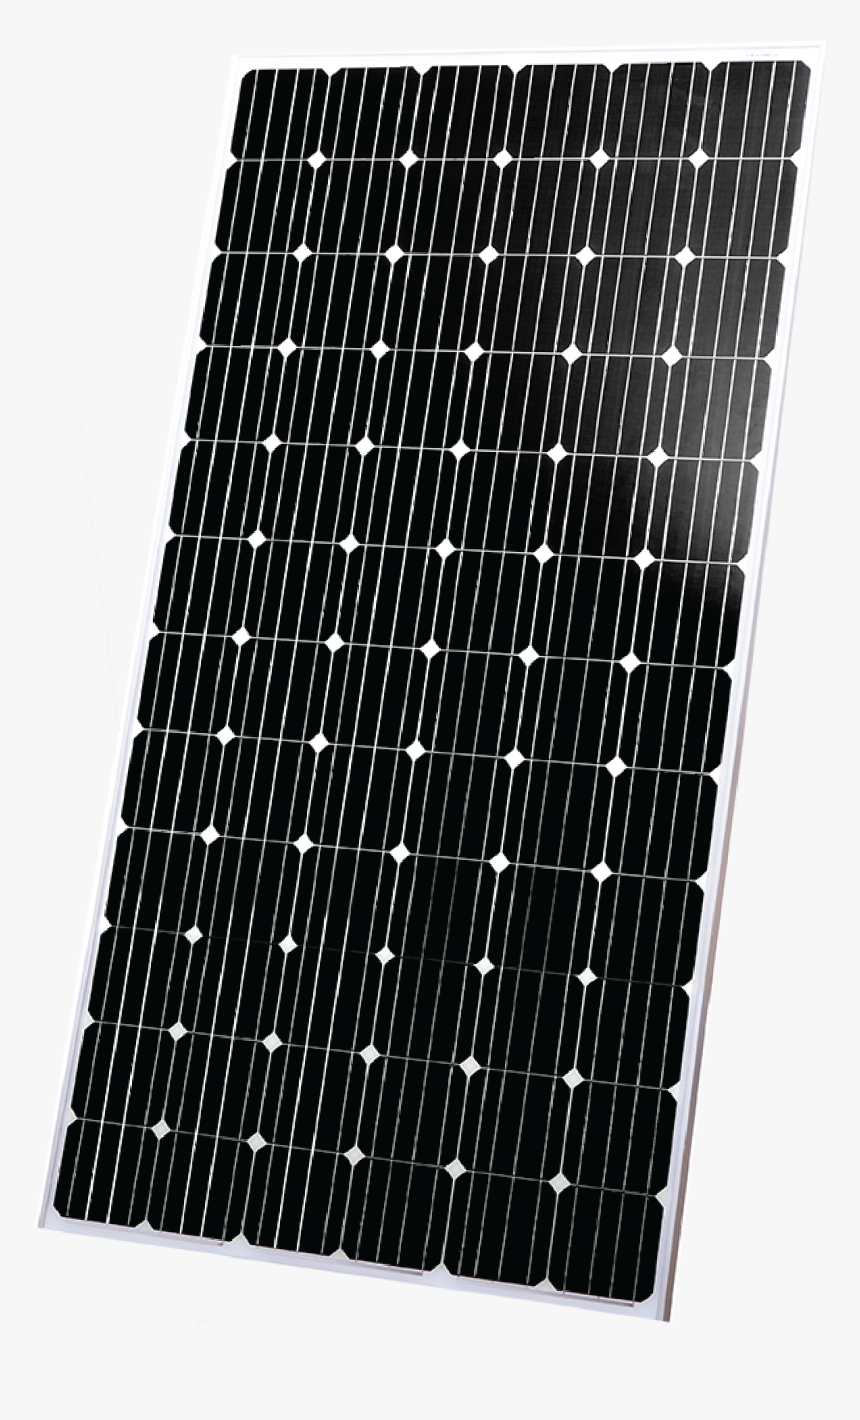 Solar Power, HD Png Download, Free Download